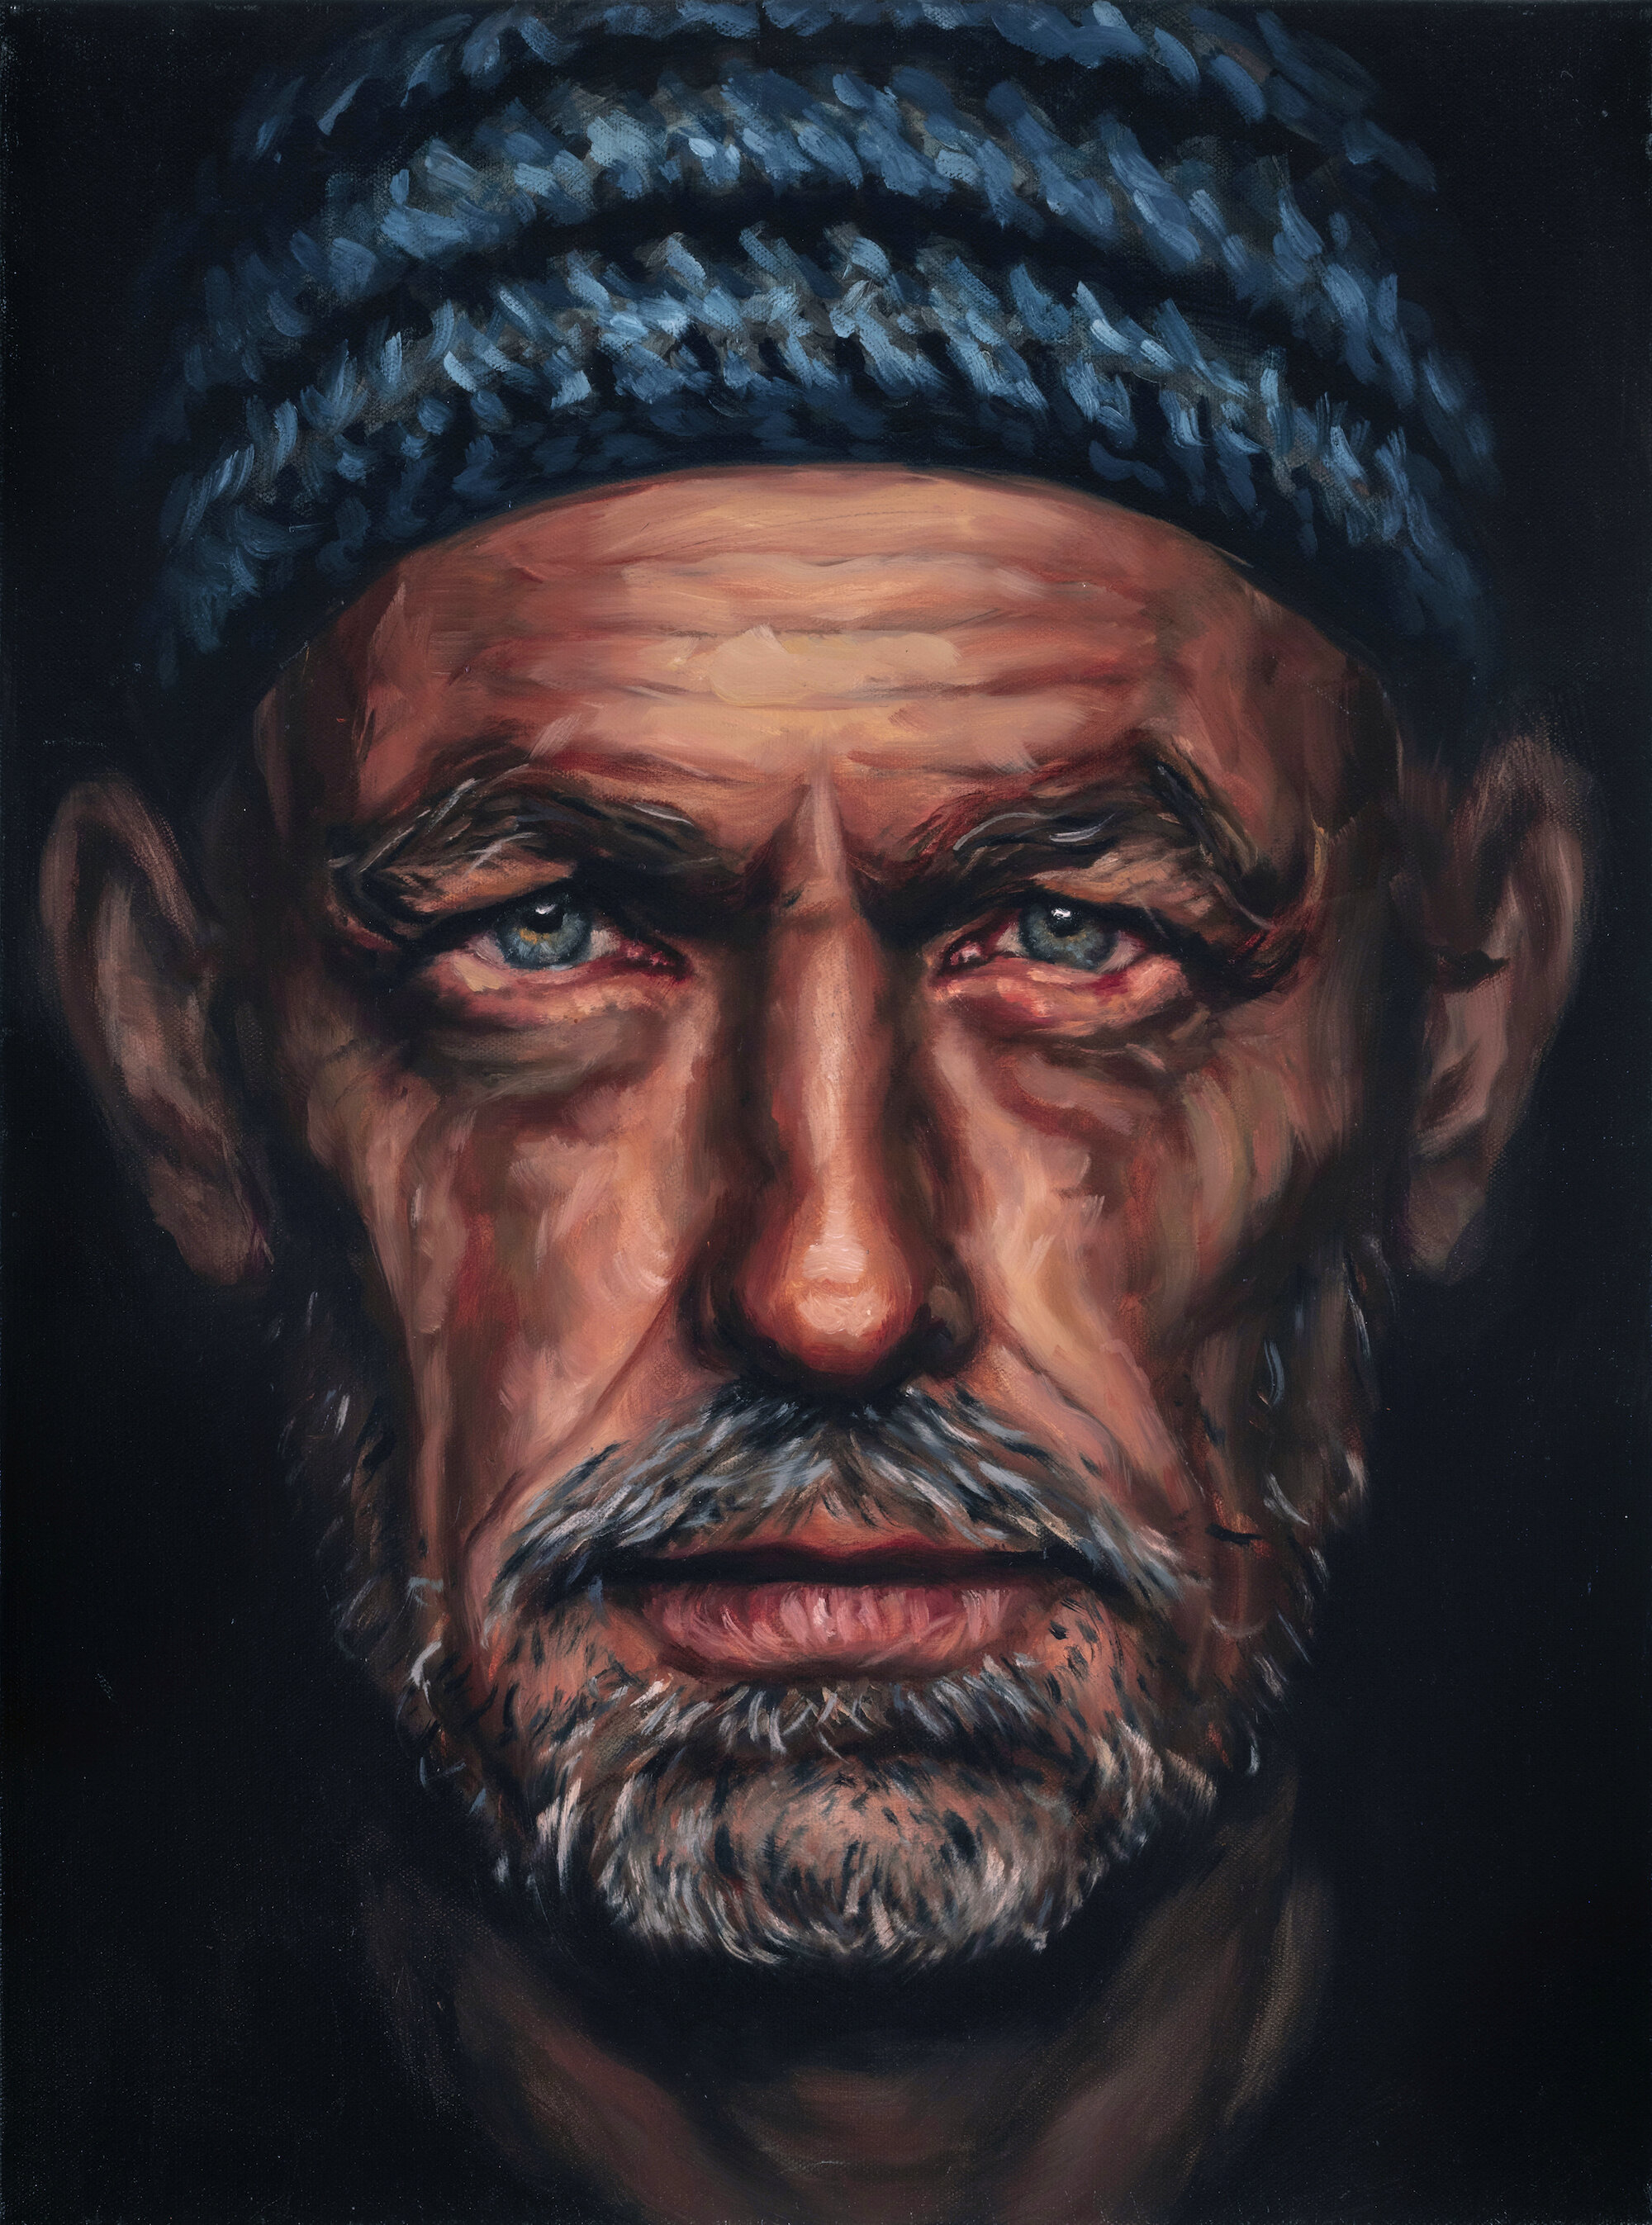  Studying Dieter    45.7x61cm (18x24”) oil on canvas  